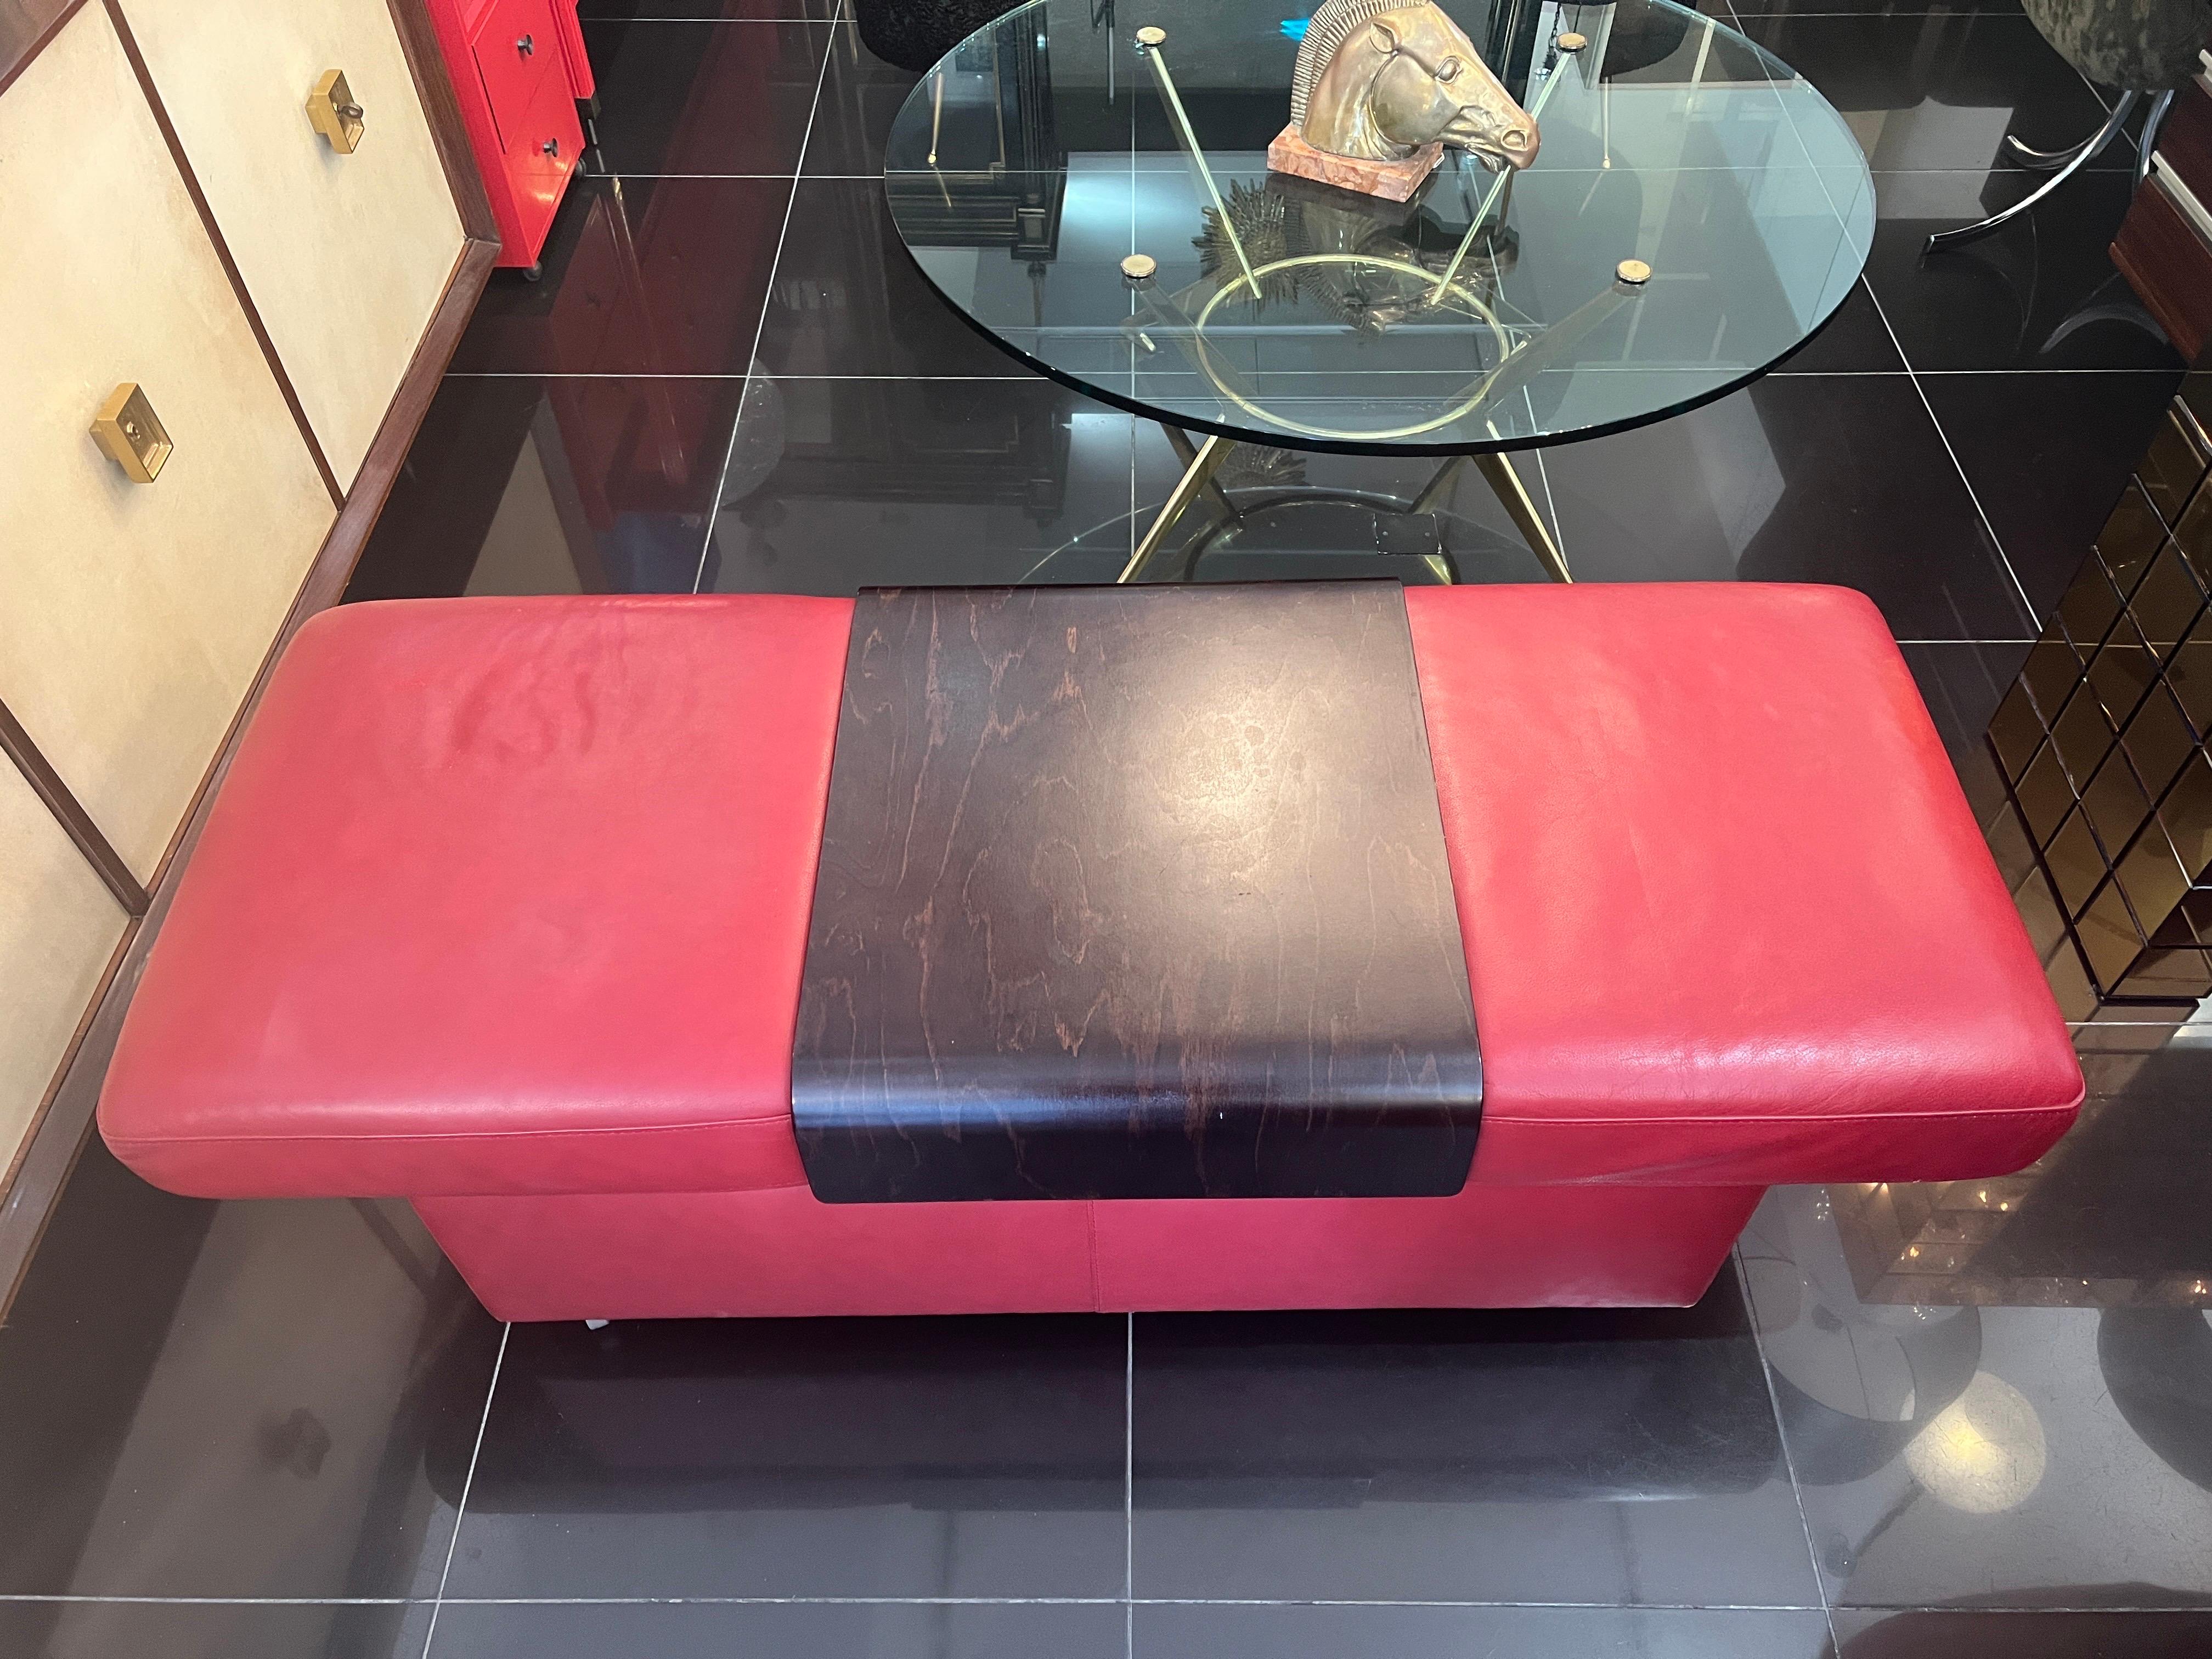 An exquisite extendable ottoman in fine red Italian nappa leather with an adjustable wood table top . The ottoman can open to reveal a good storage space on the inside which is fully lined in wood . The bentwood table top is removable and can be